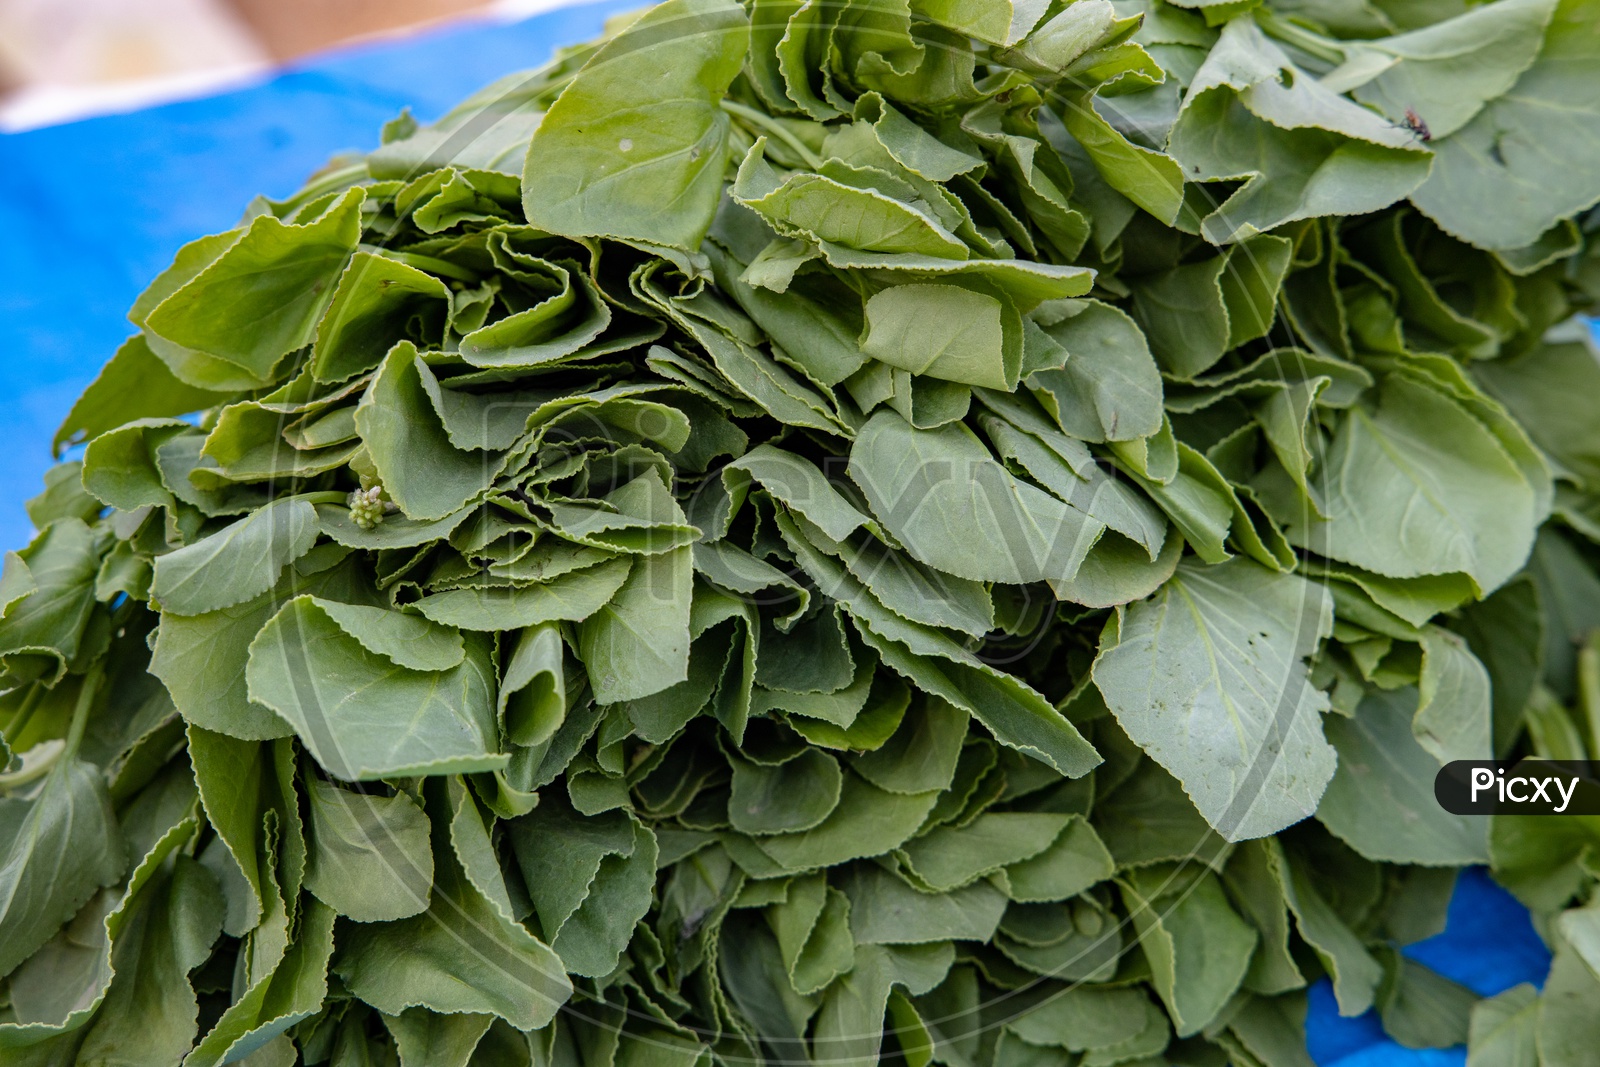 Spinach Palakura  Green Leafy Vegetables    in a vegetable Vendor Stall